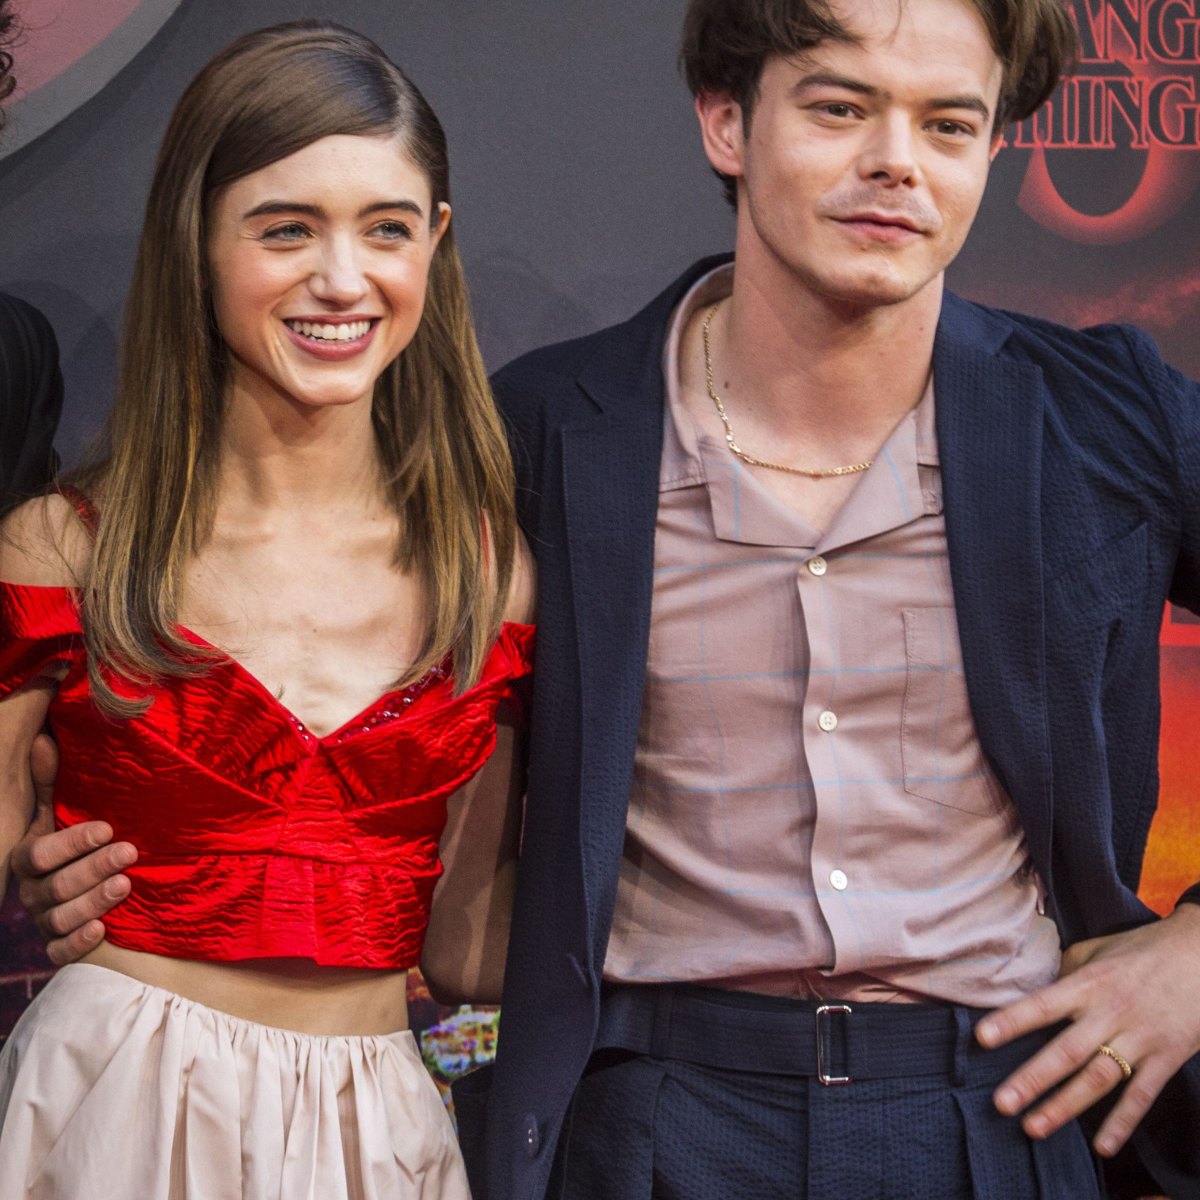 Are Nancy and Jonathan from Stranger Things dating in real life?